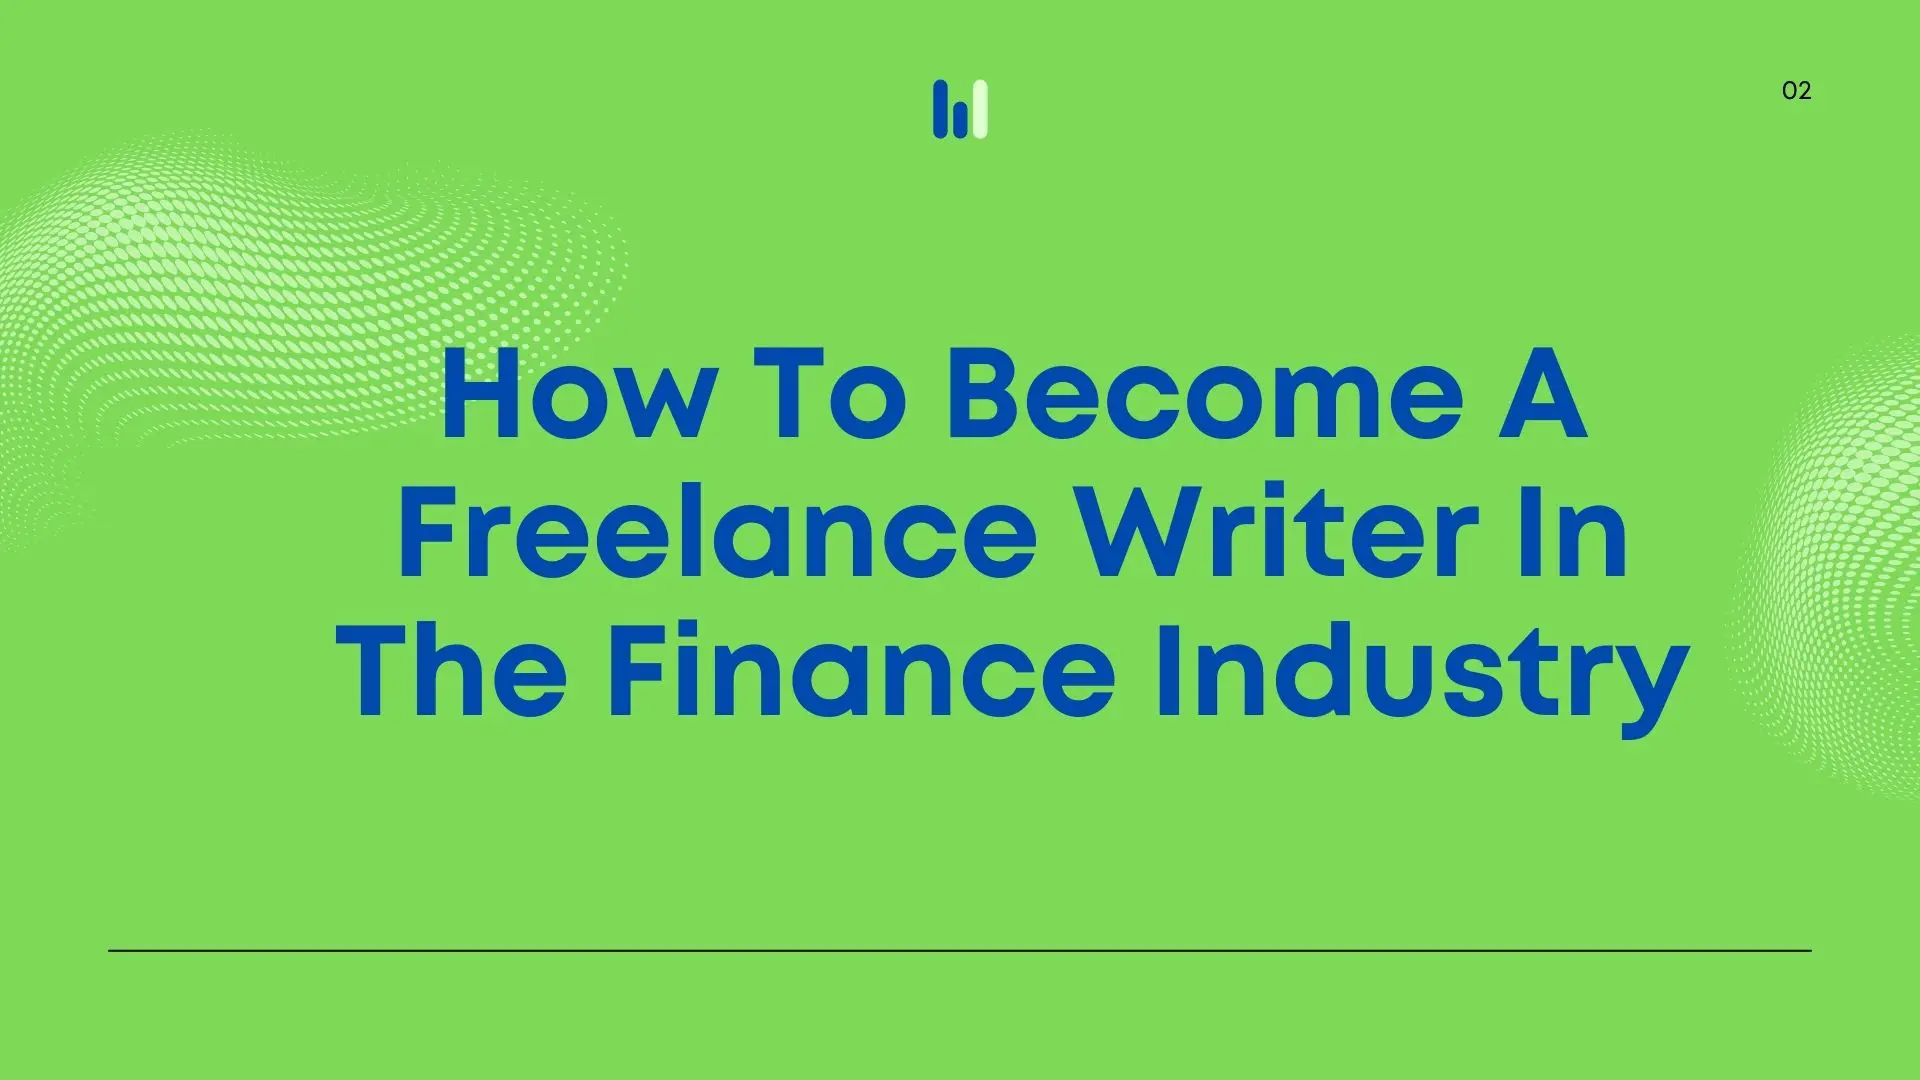 How To Become A Freelance Writer In The Finance Industry